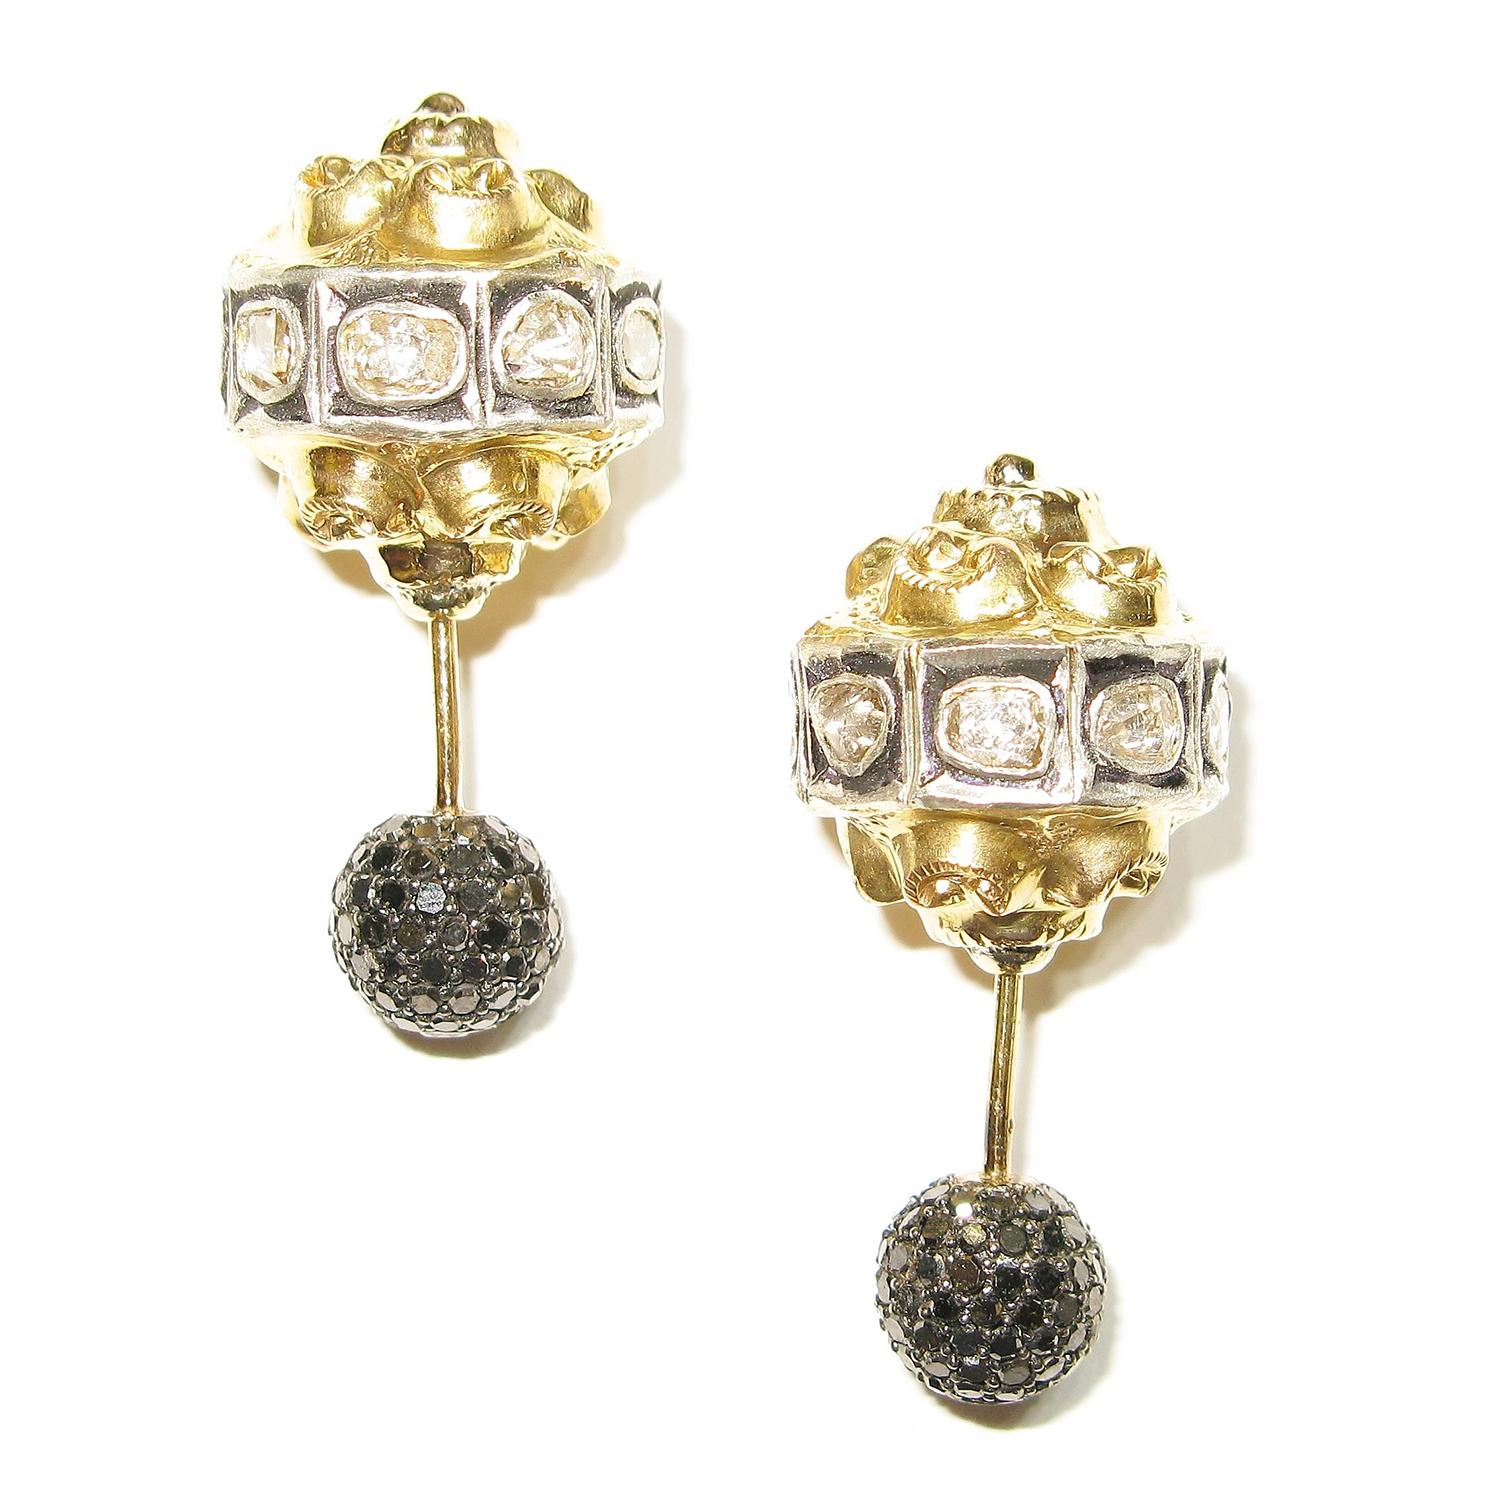 Mixed Cut Antique Looking Double Sided Earrings With Diamonds Made In 14k Gold & Silver For Sale